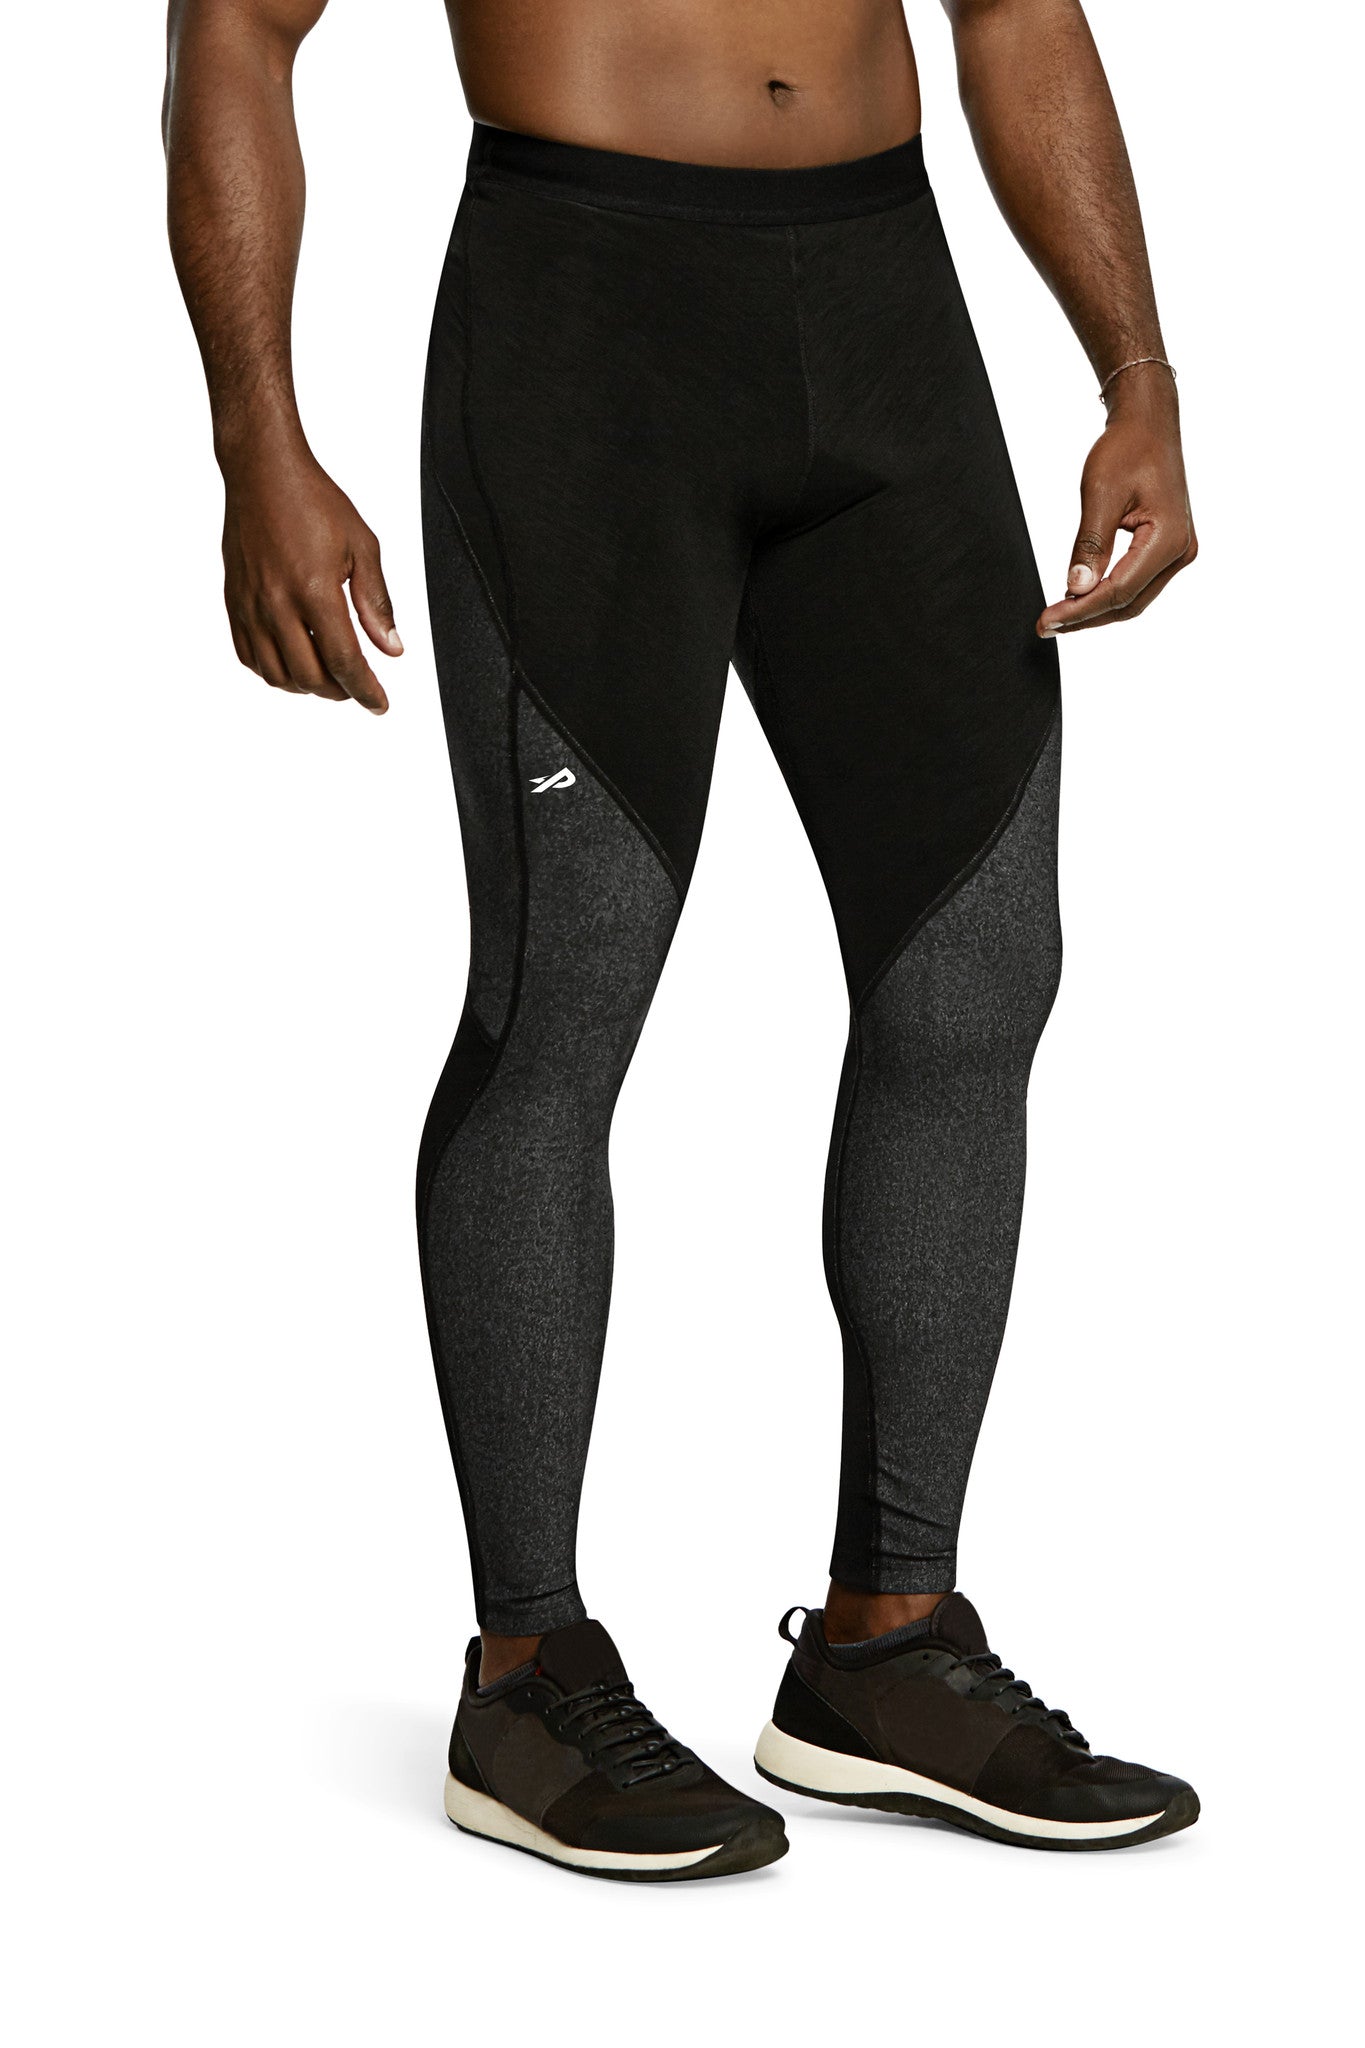 Pro Resistance Tights for Men - Athletic Grey – Physiclo